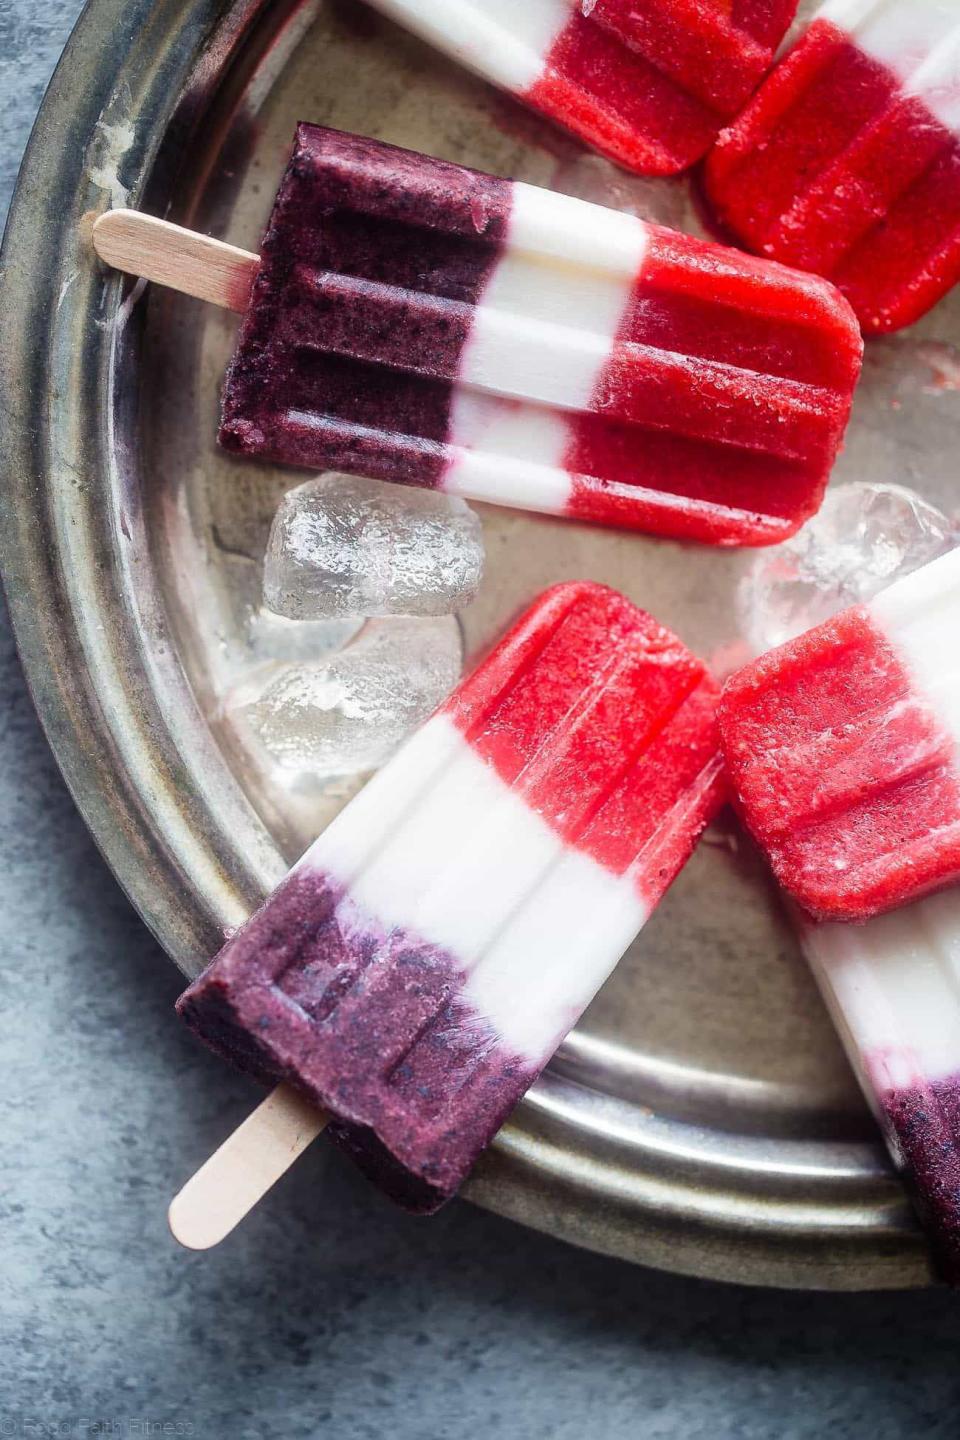 Easy Summer Desserts, From Watermelon Slushies to Fruit Skewers